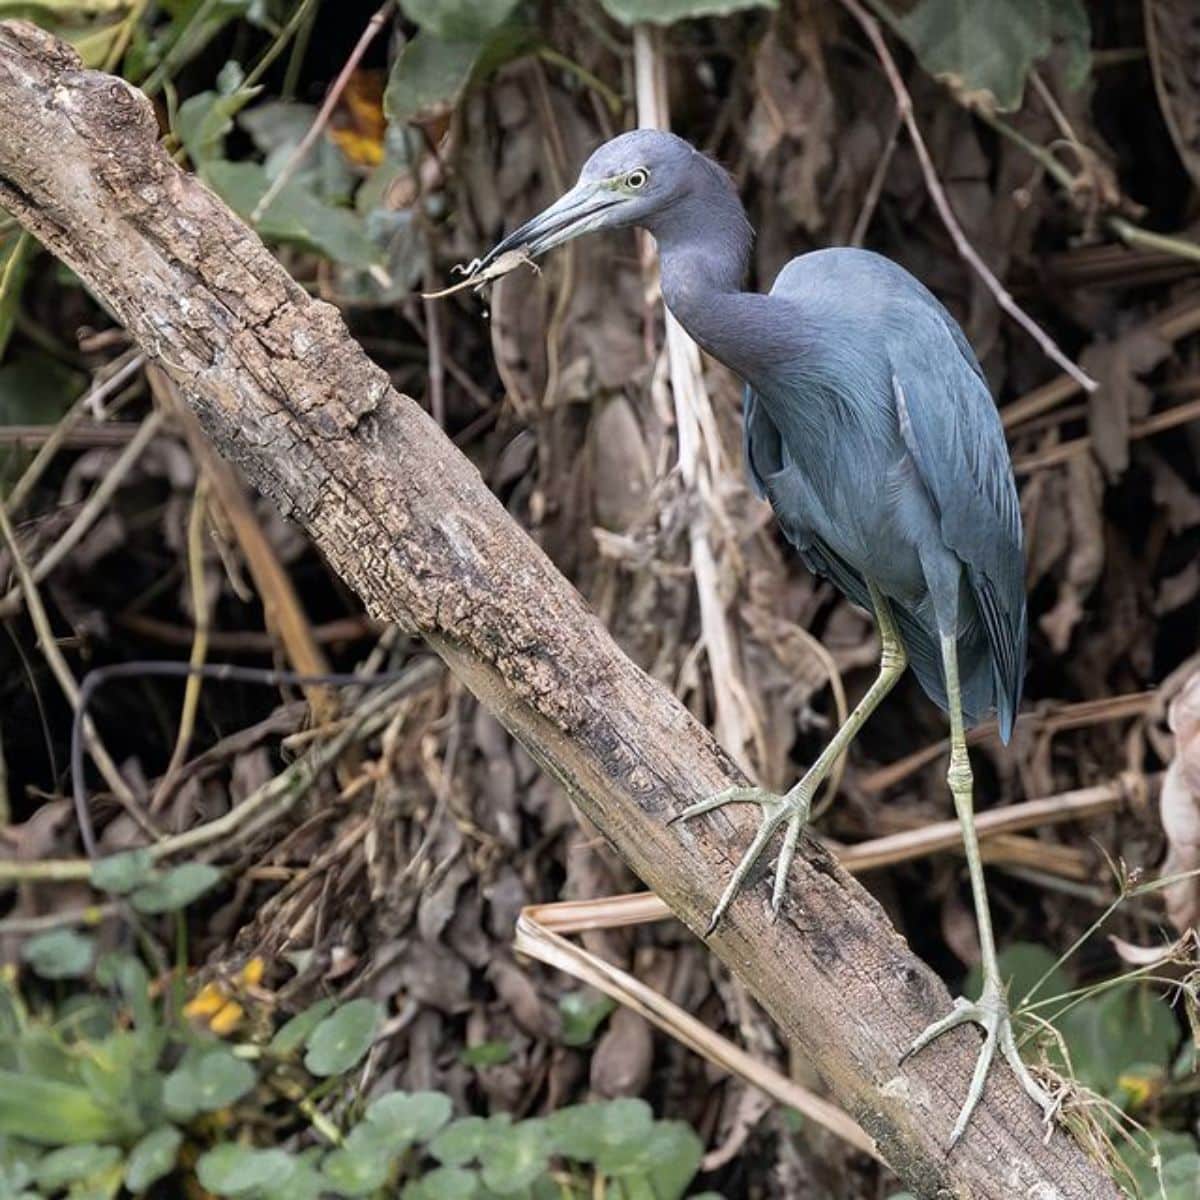 A big tall Little Blue Heron perched on an old dried branch.